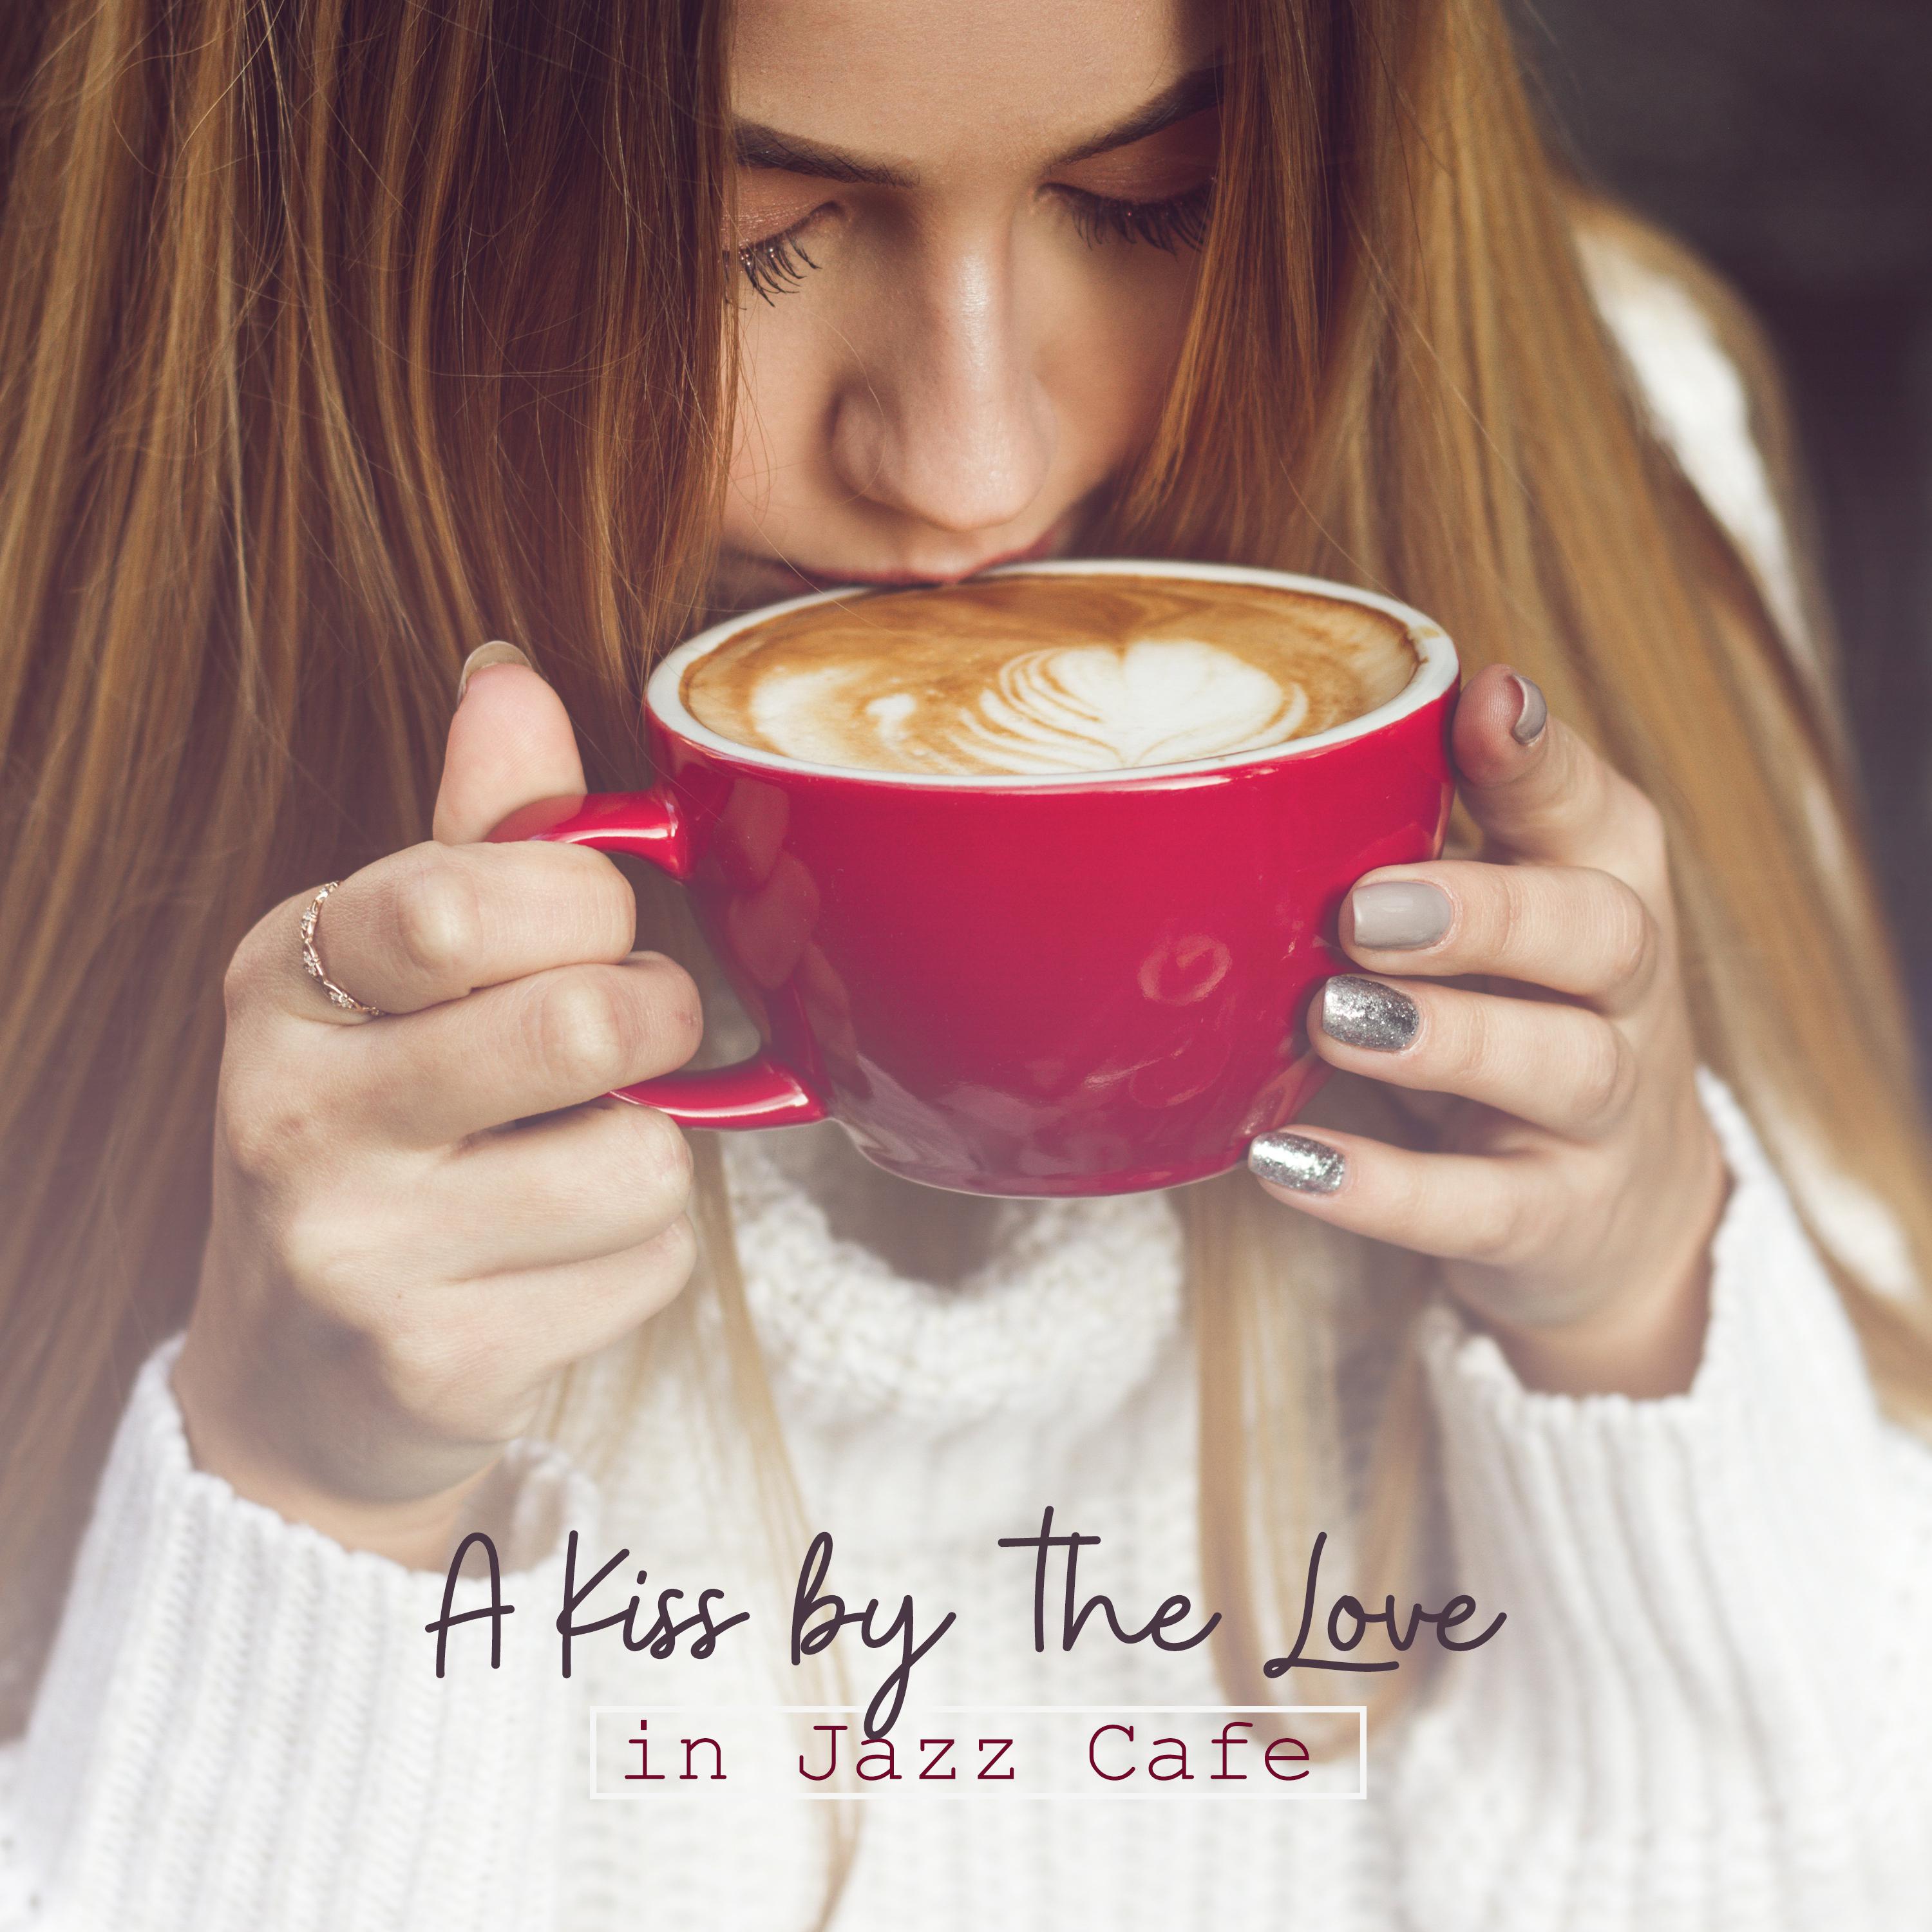 A Kiss by the Love in Jazz Cafe: 2019 Instrumental Smooth Jazz Music Compilation for Cafe or Restaurant, Pleasant Background Songs for Friends Meeting or Romantic Dinner